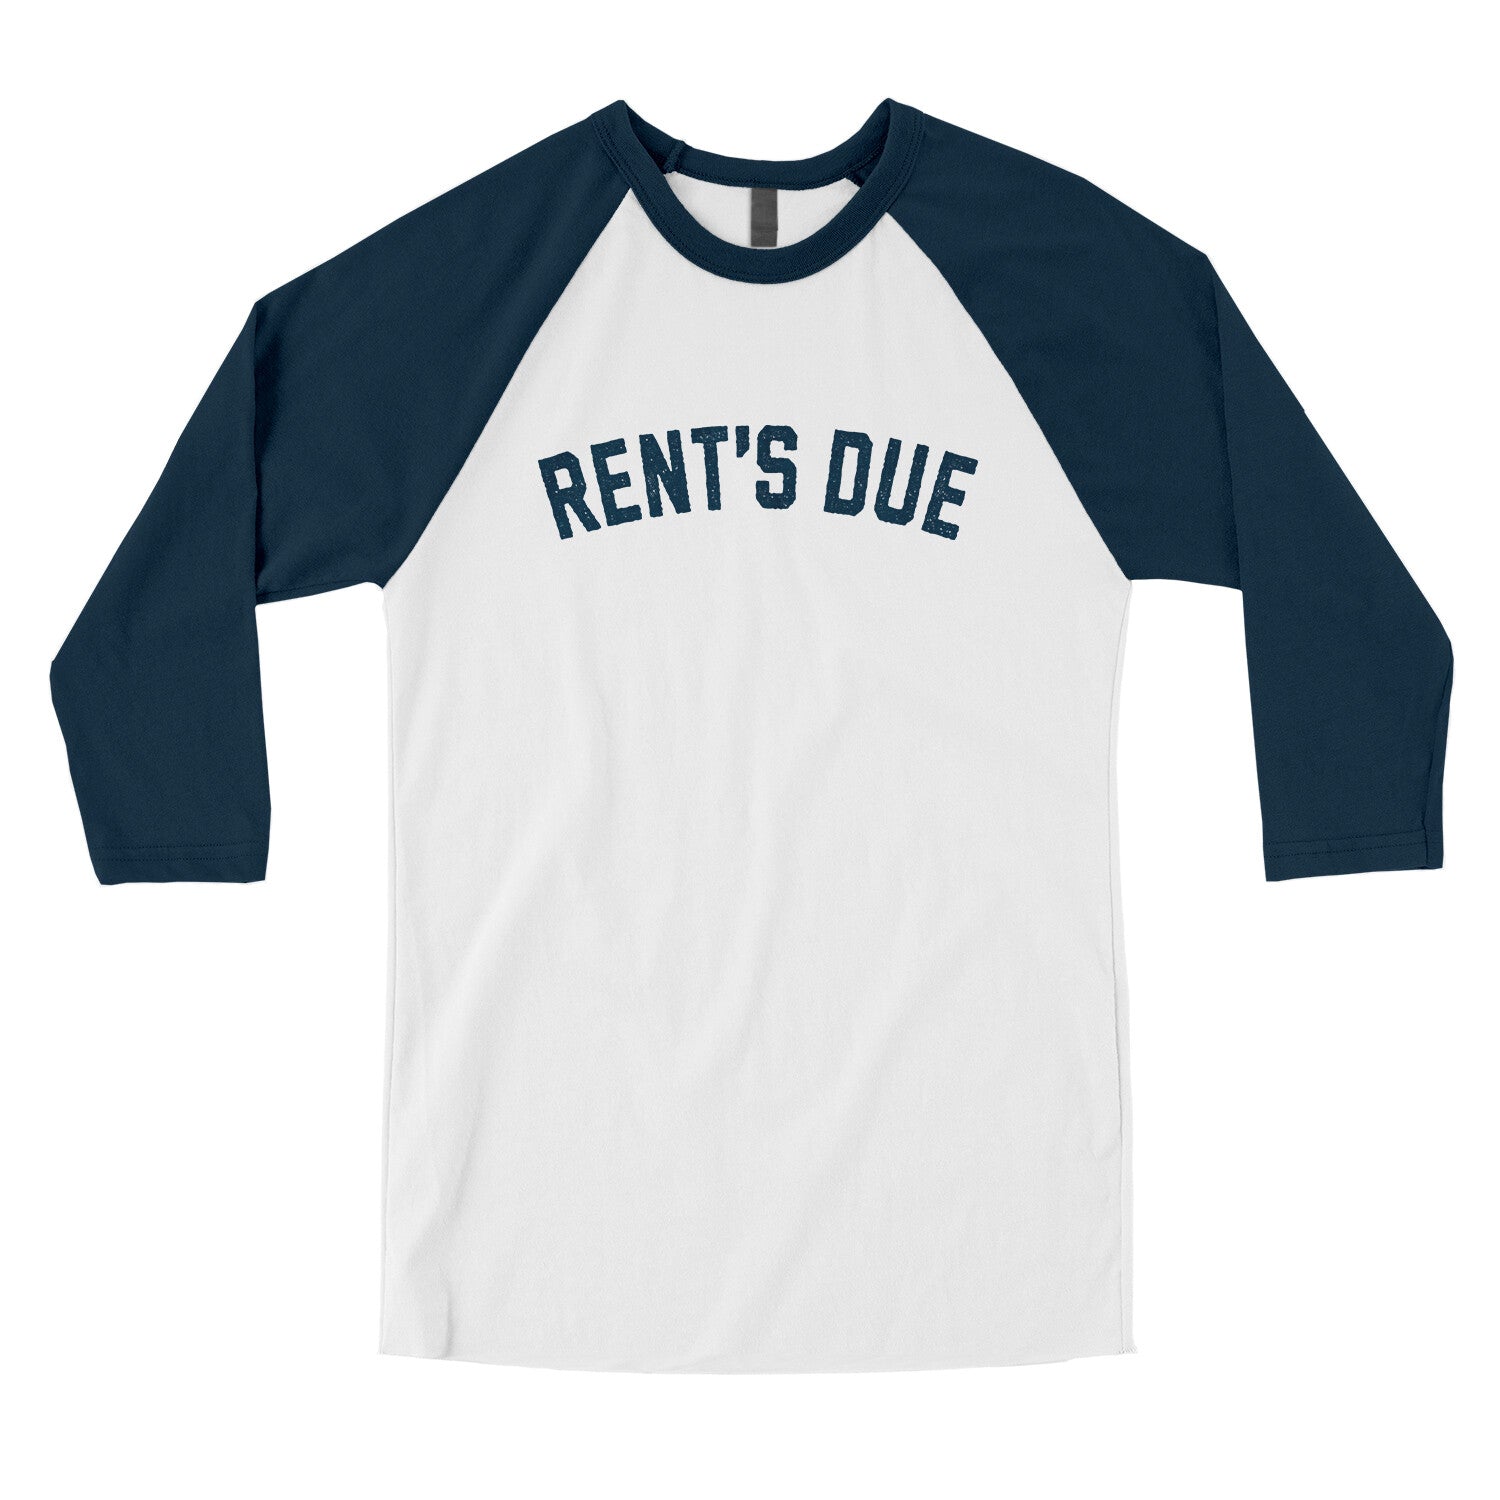 Rent's Due in White with Navy Color